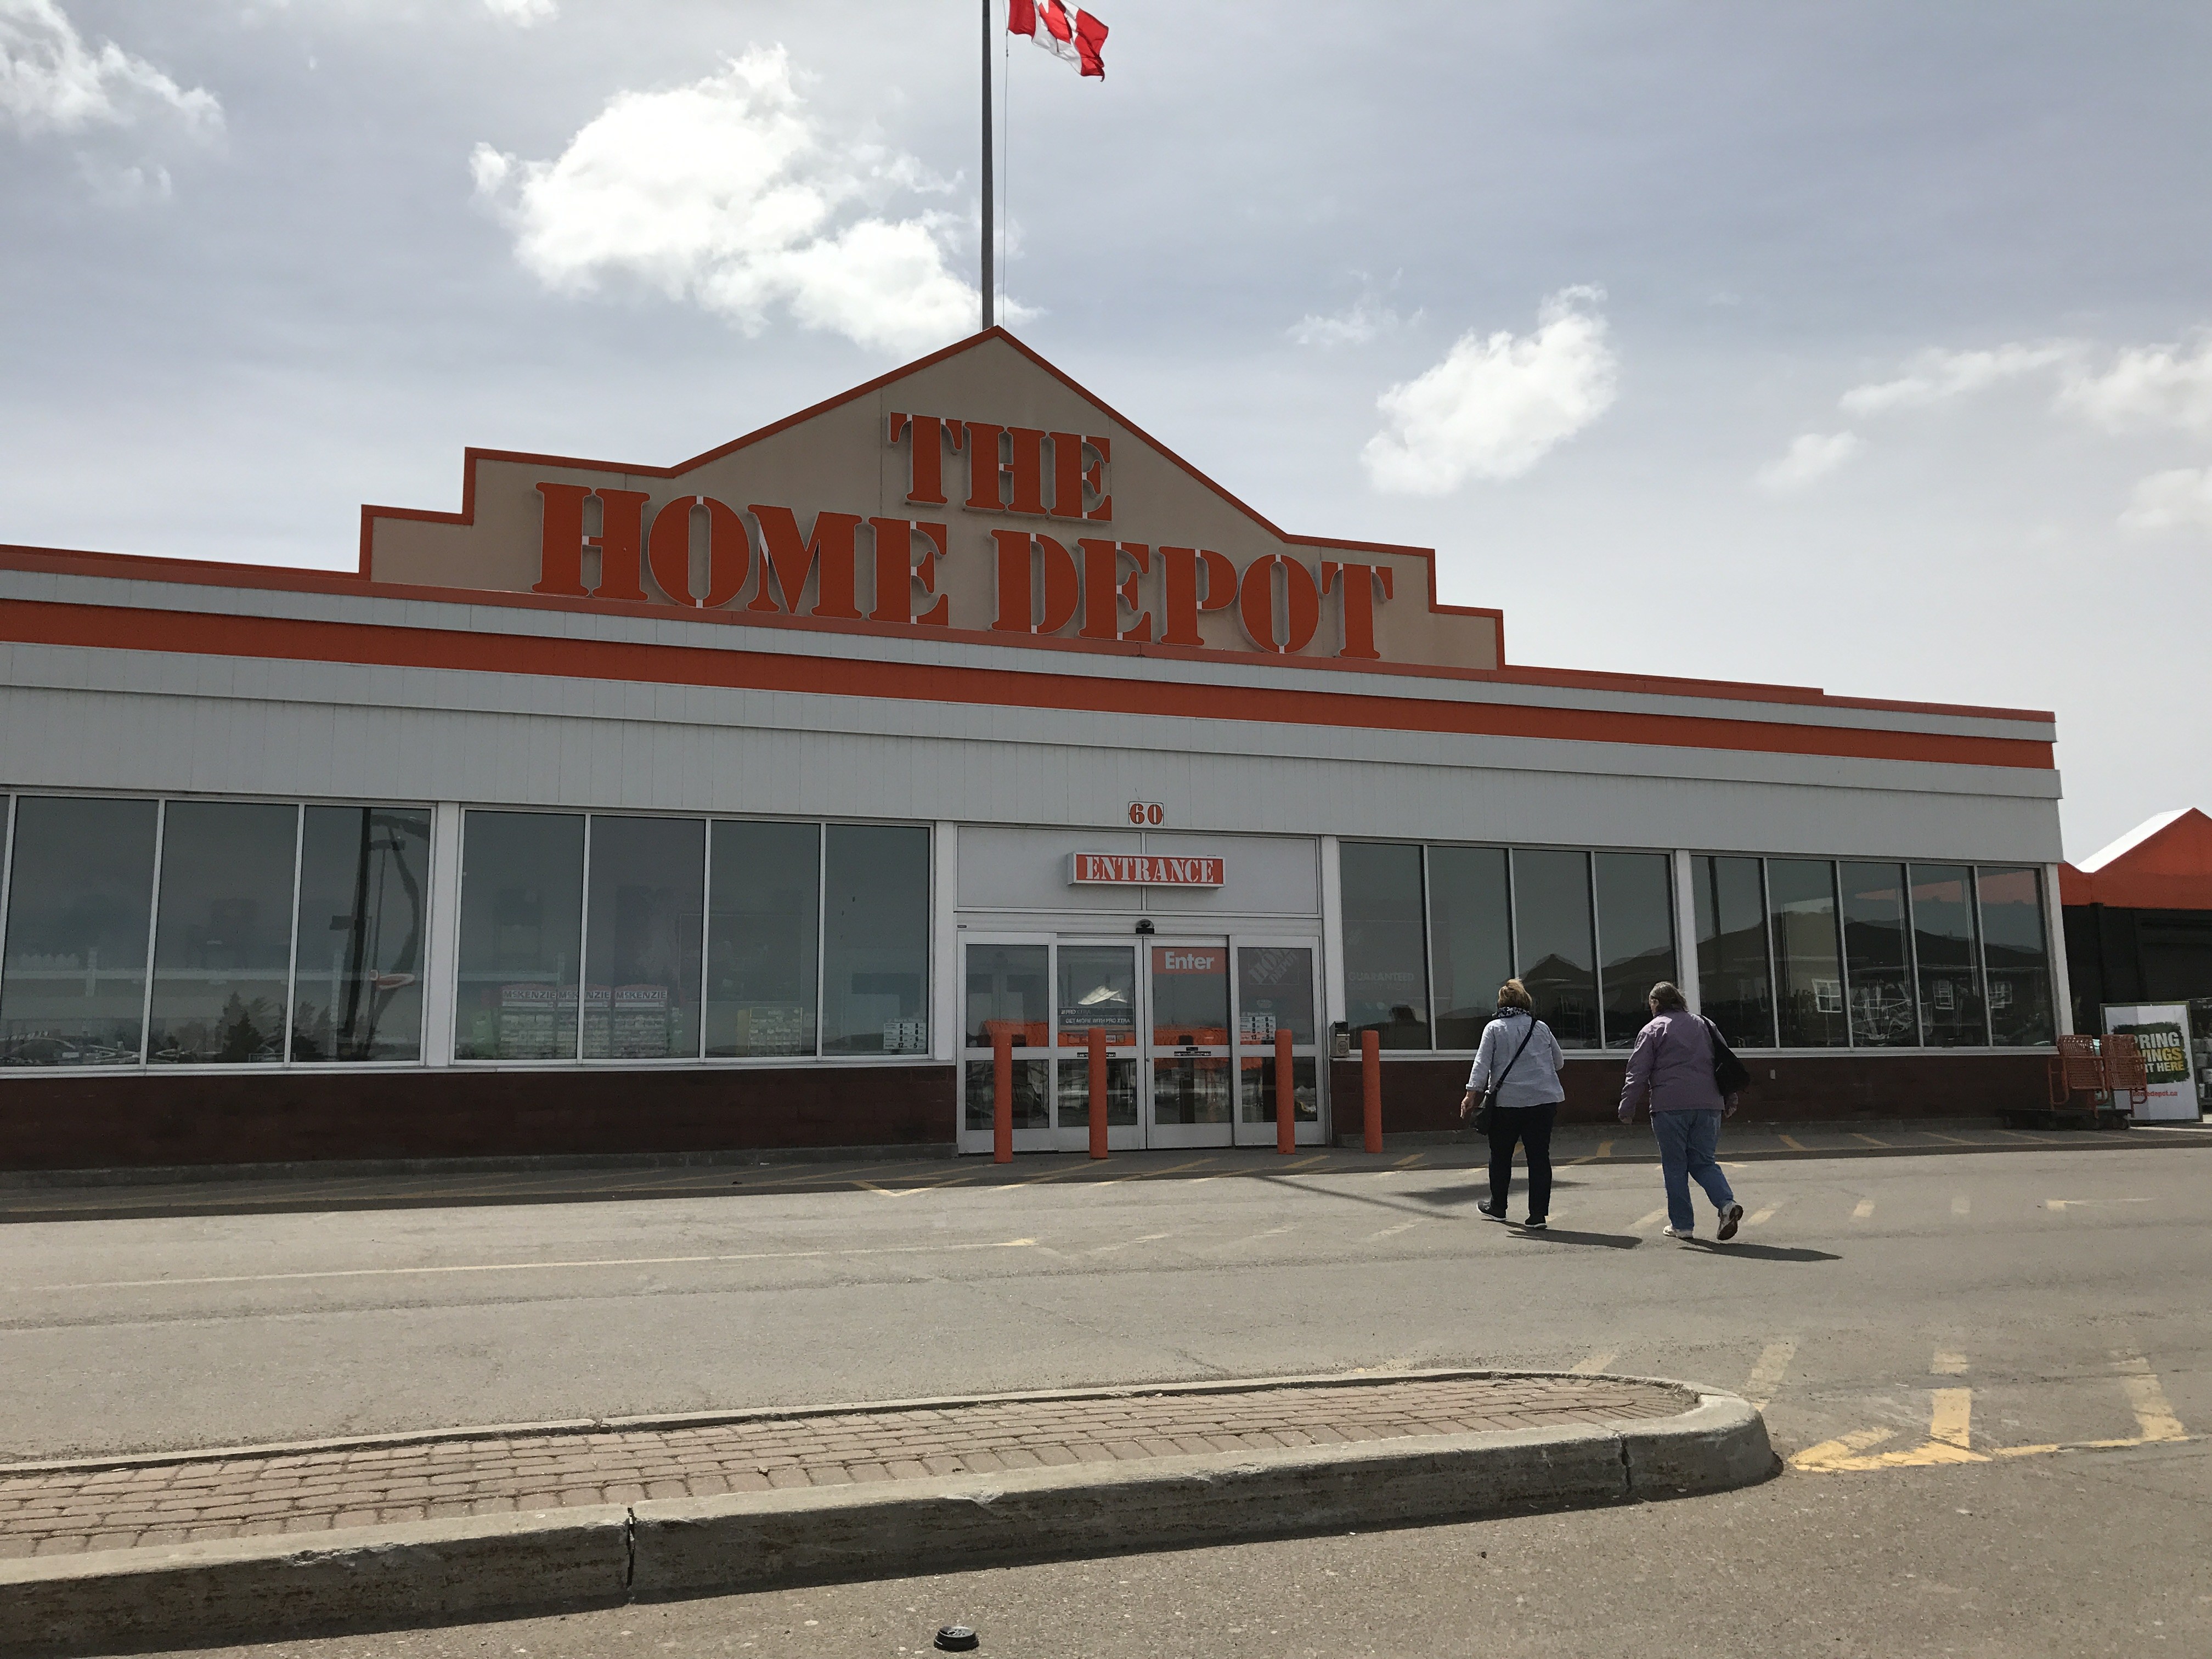 Home Depot can process web orders quickly and accurately (photo Stephen Pate/NJN Network)